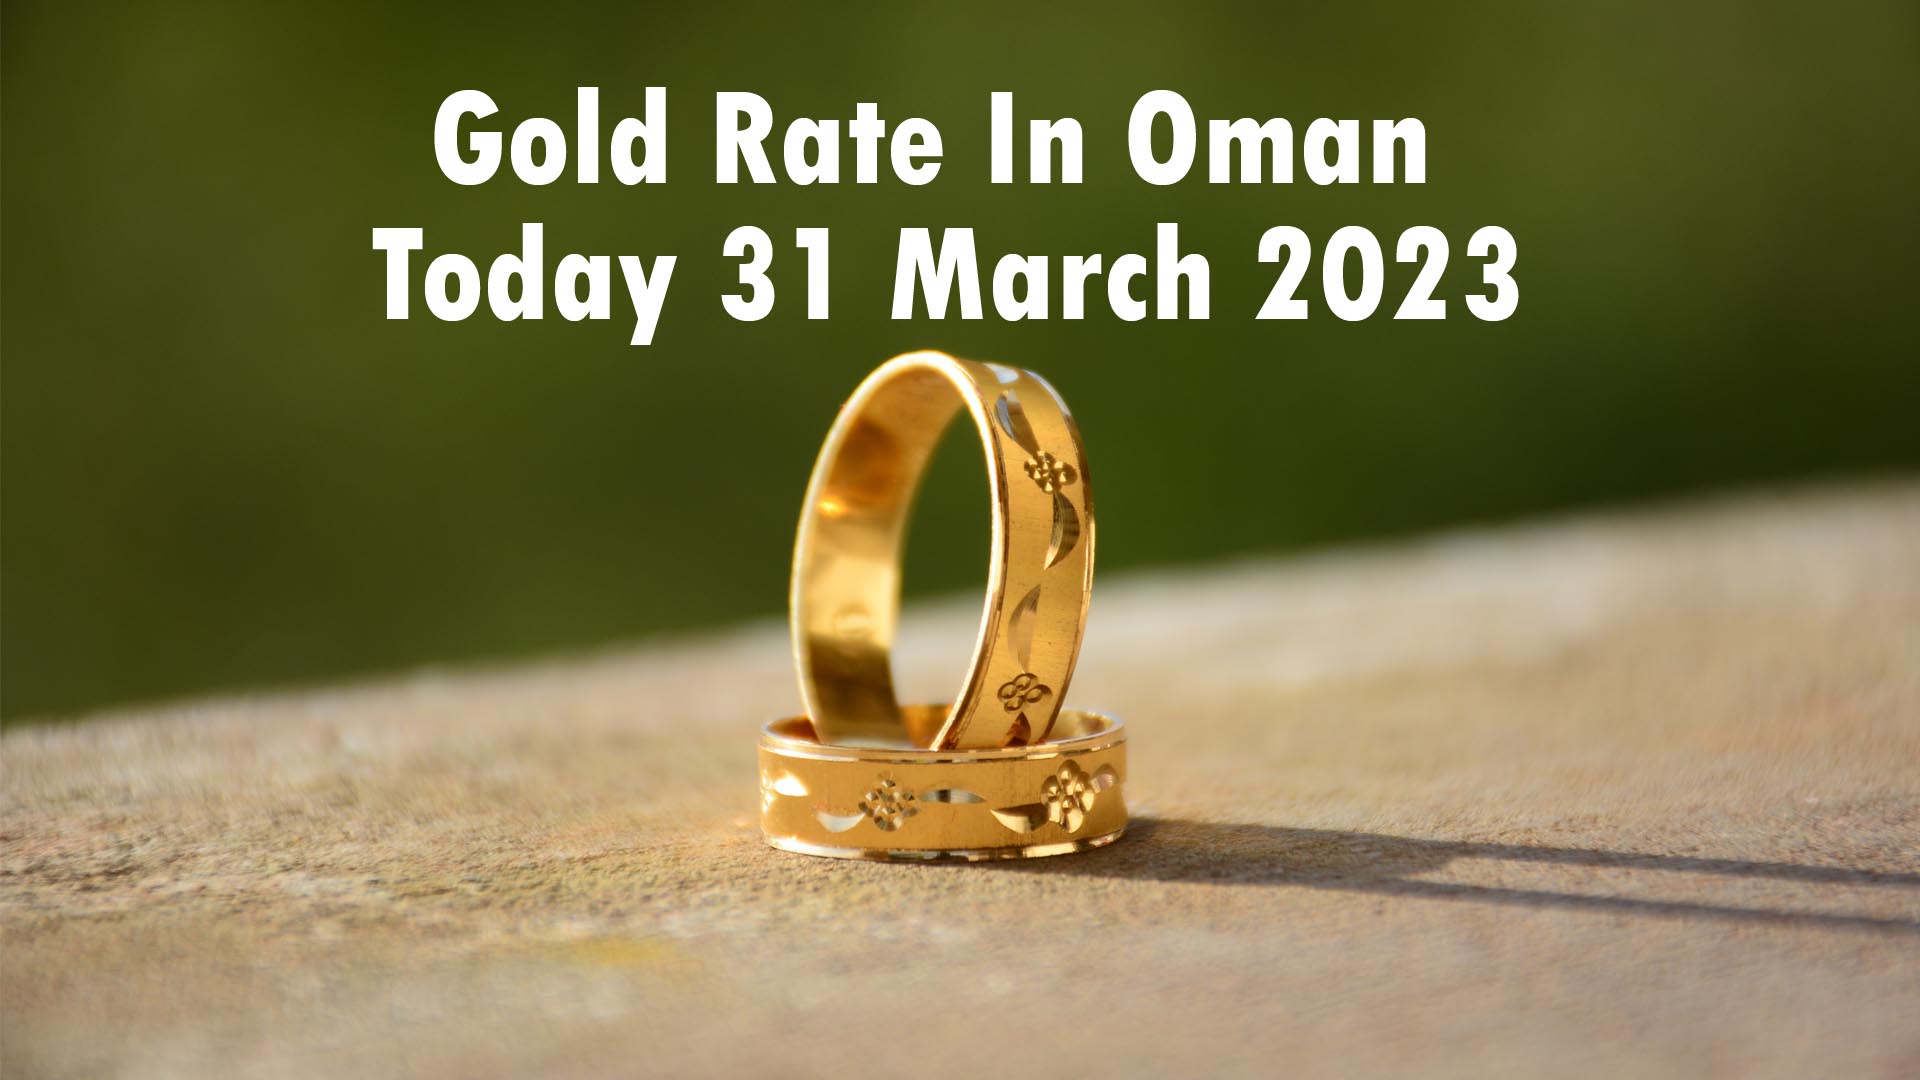 Gold Rate In Oman